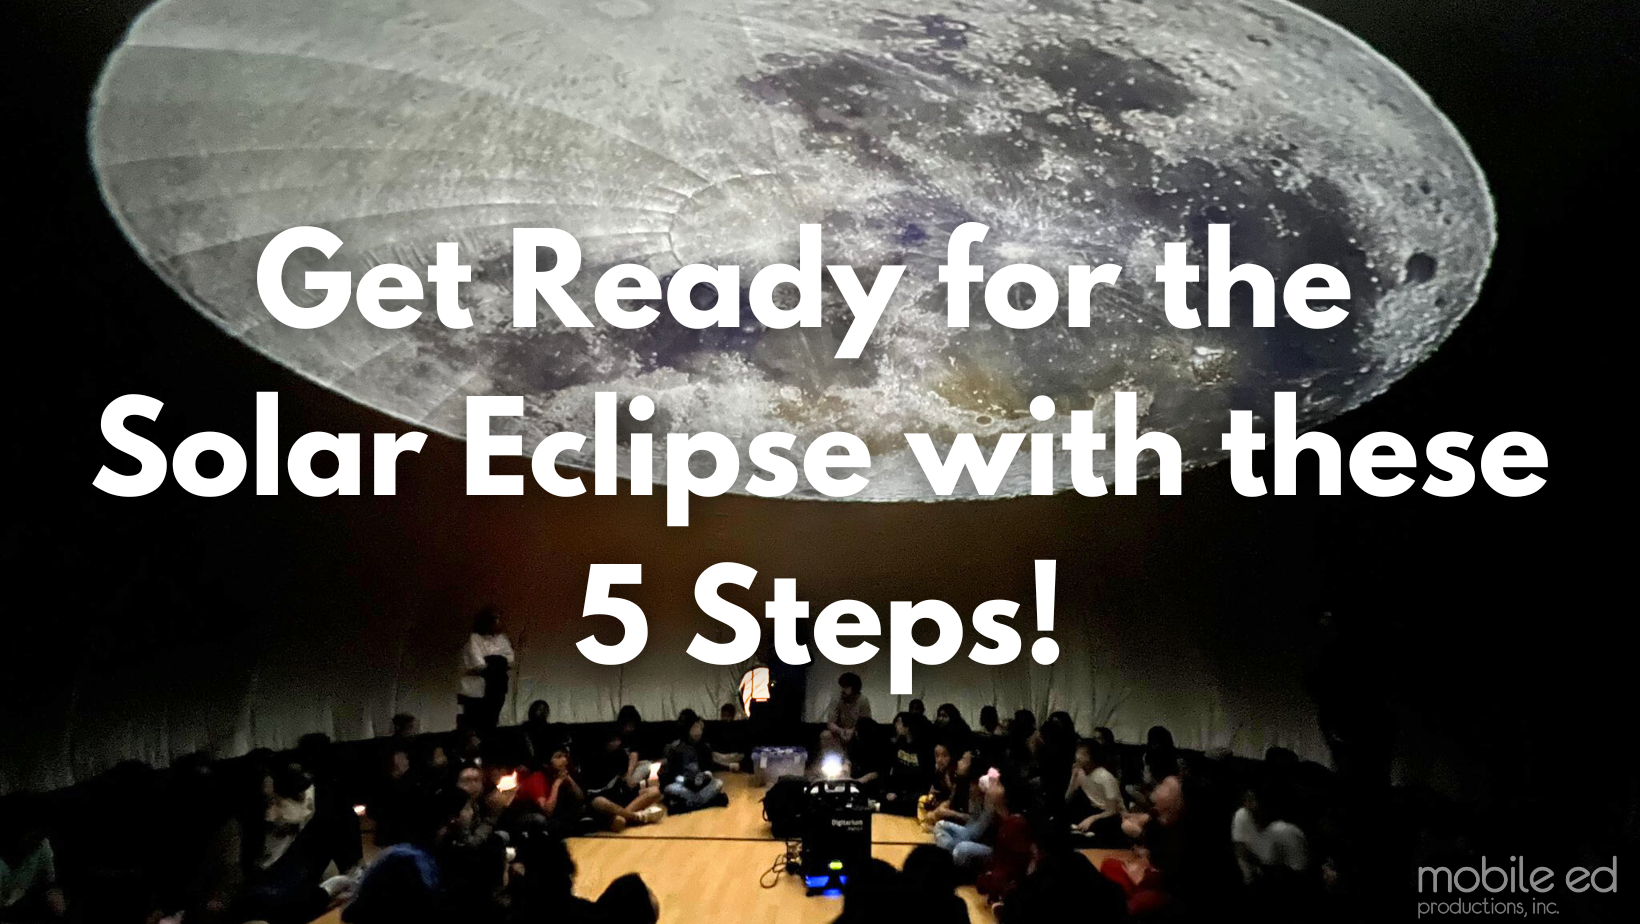 Get Ready for the Solar Eclipse with these 5 Steps!